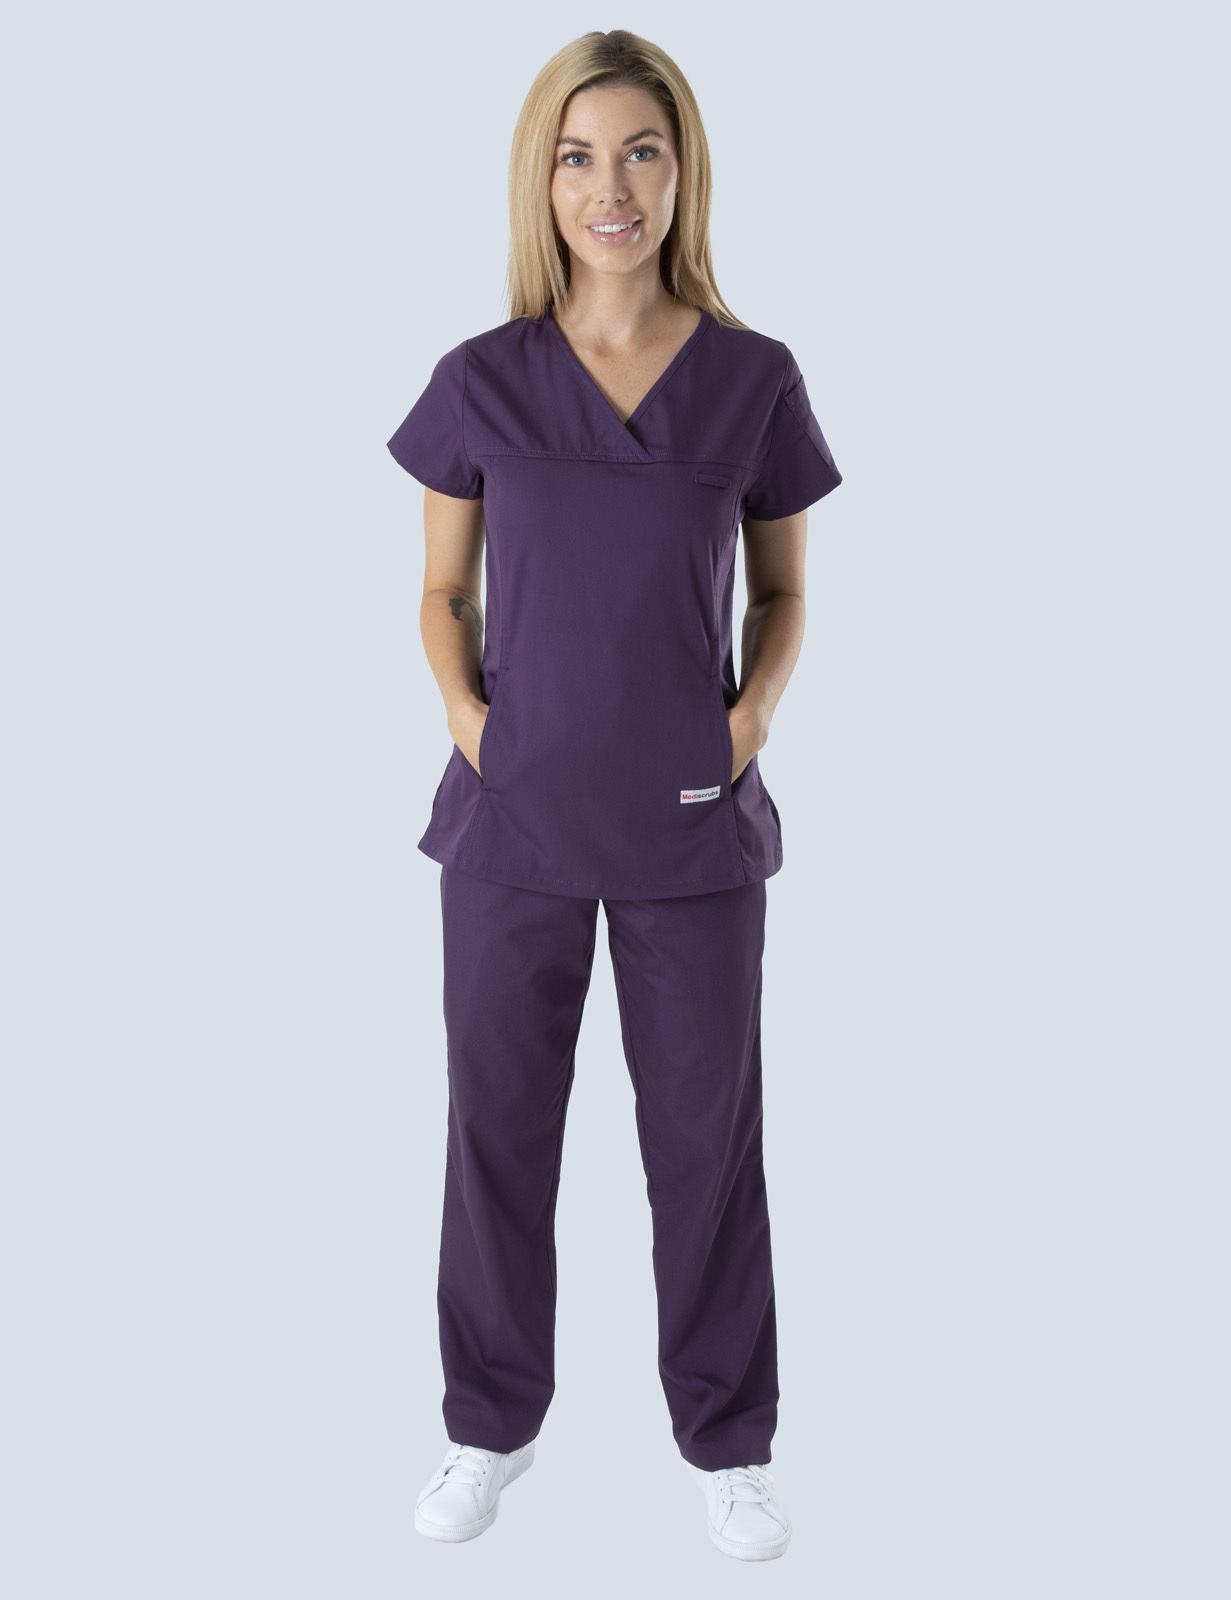 Rockhampton Base Hospital - Paediatric Unit (Women's Fit Solid Scrub Top and Cargo Pants in Aubergine incl Logos)